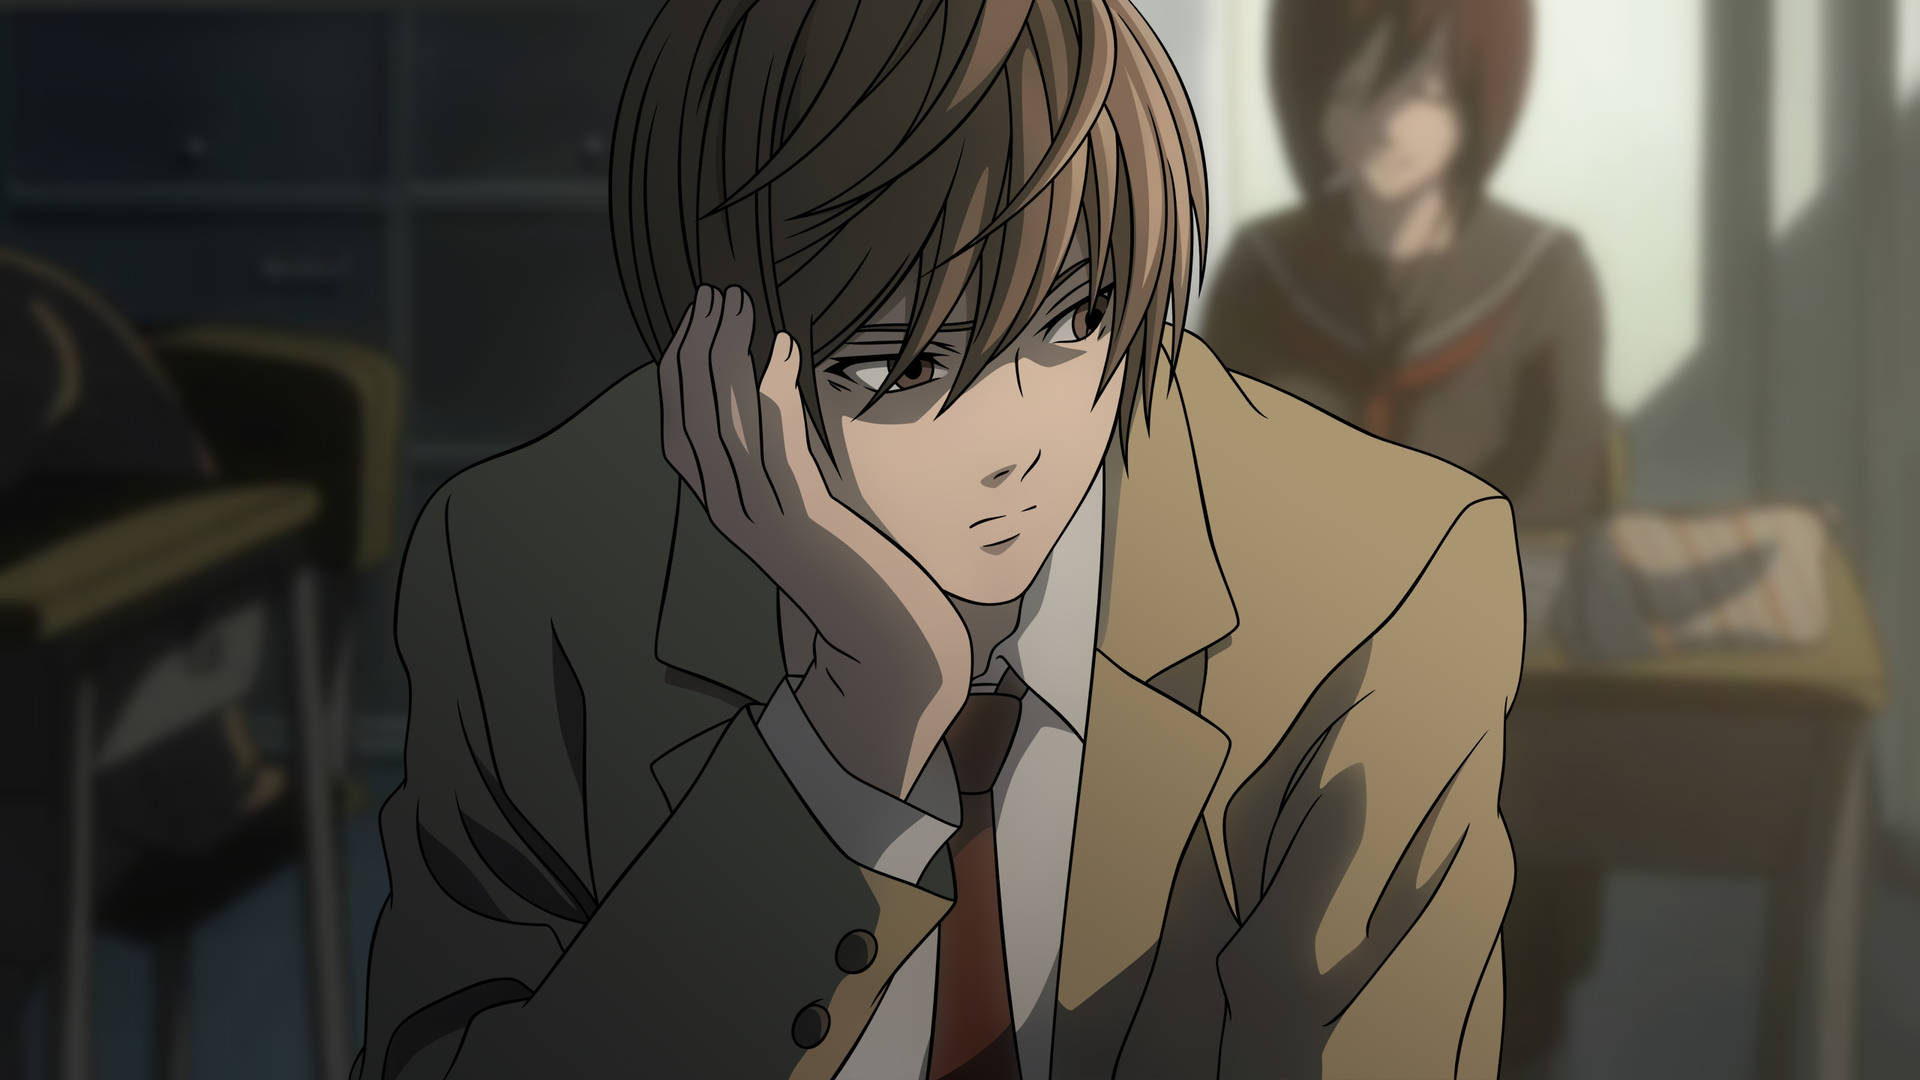 Top 999+ Light Yagami Wallpaper Full HD, 4K Free to Use